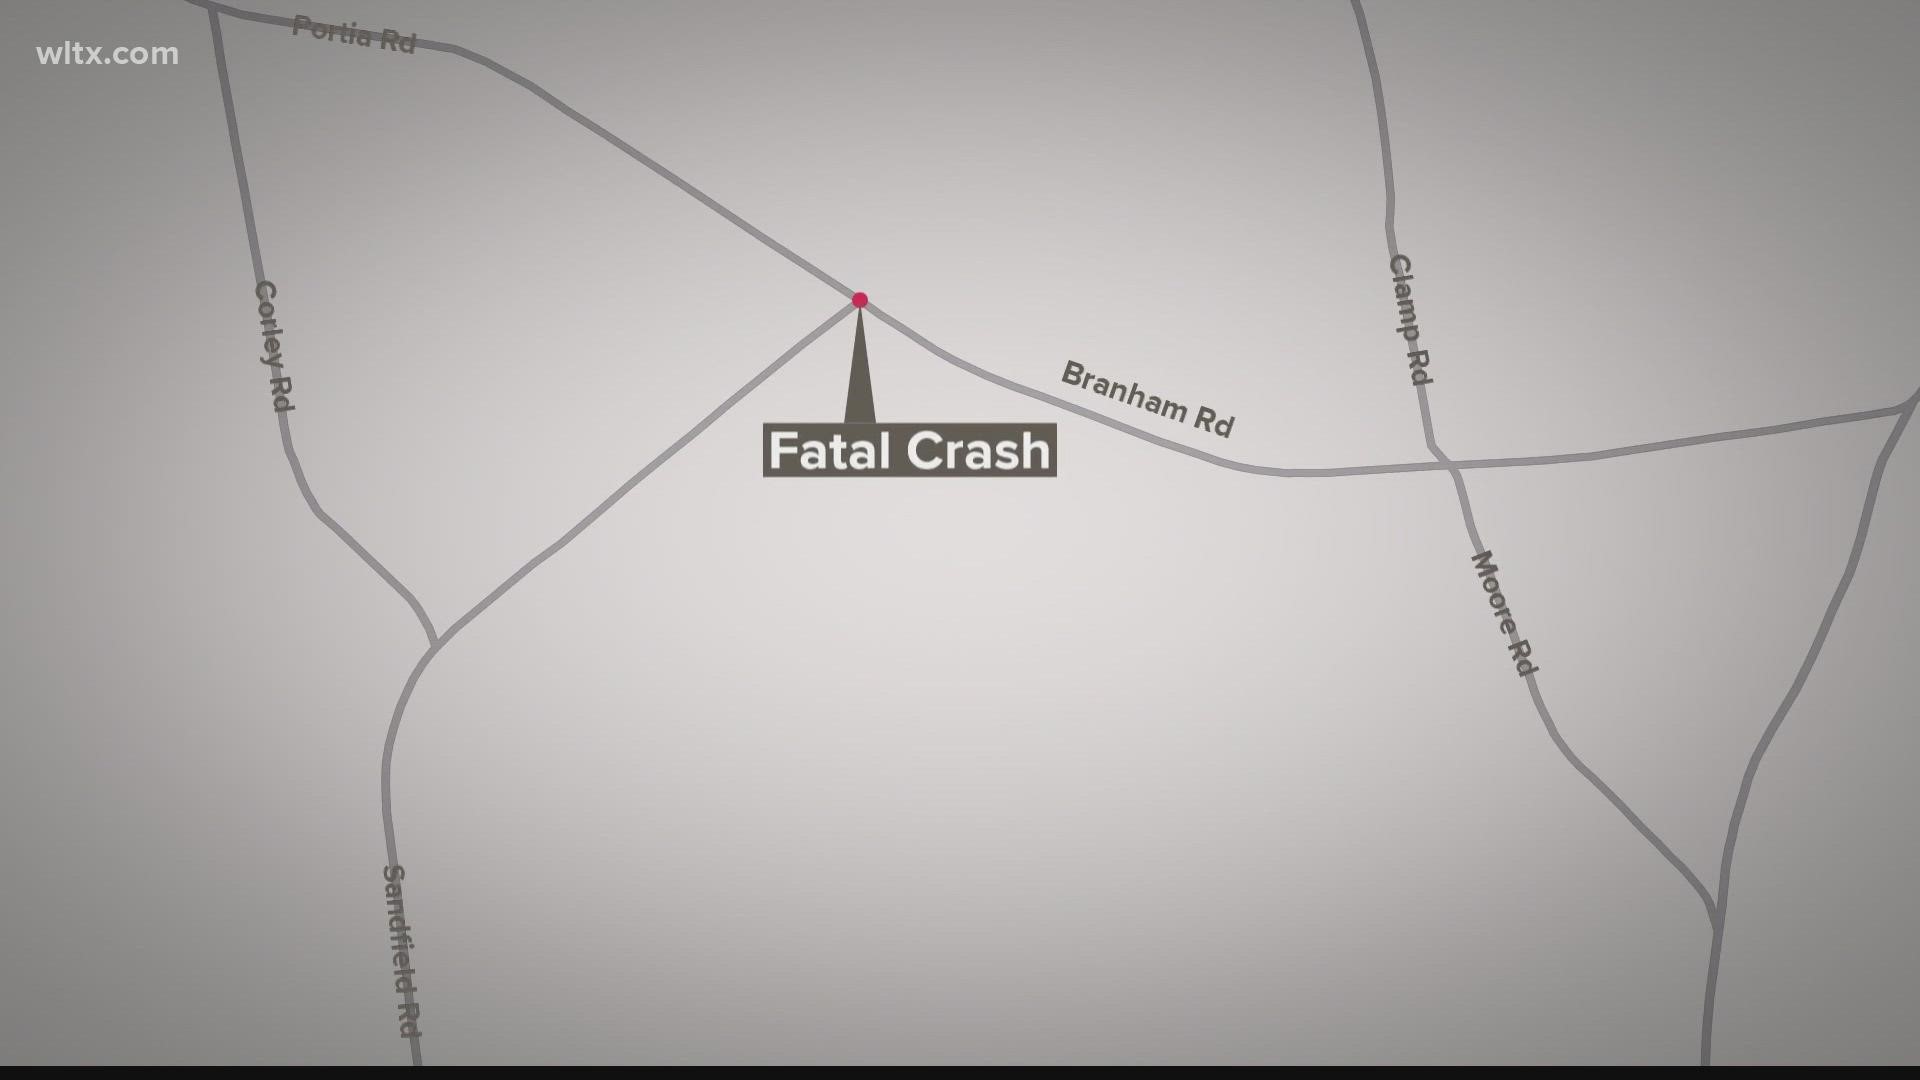 One person has died following a motorcycle accident near Blythewood on Thursday evening.